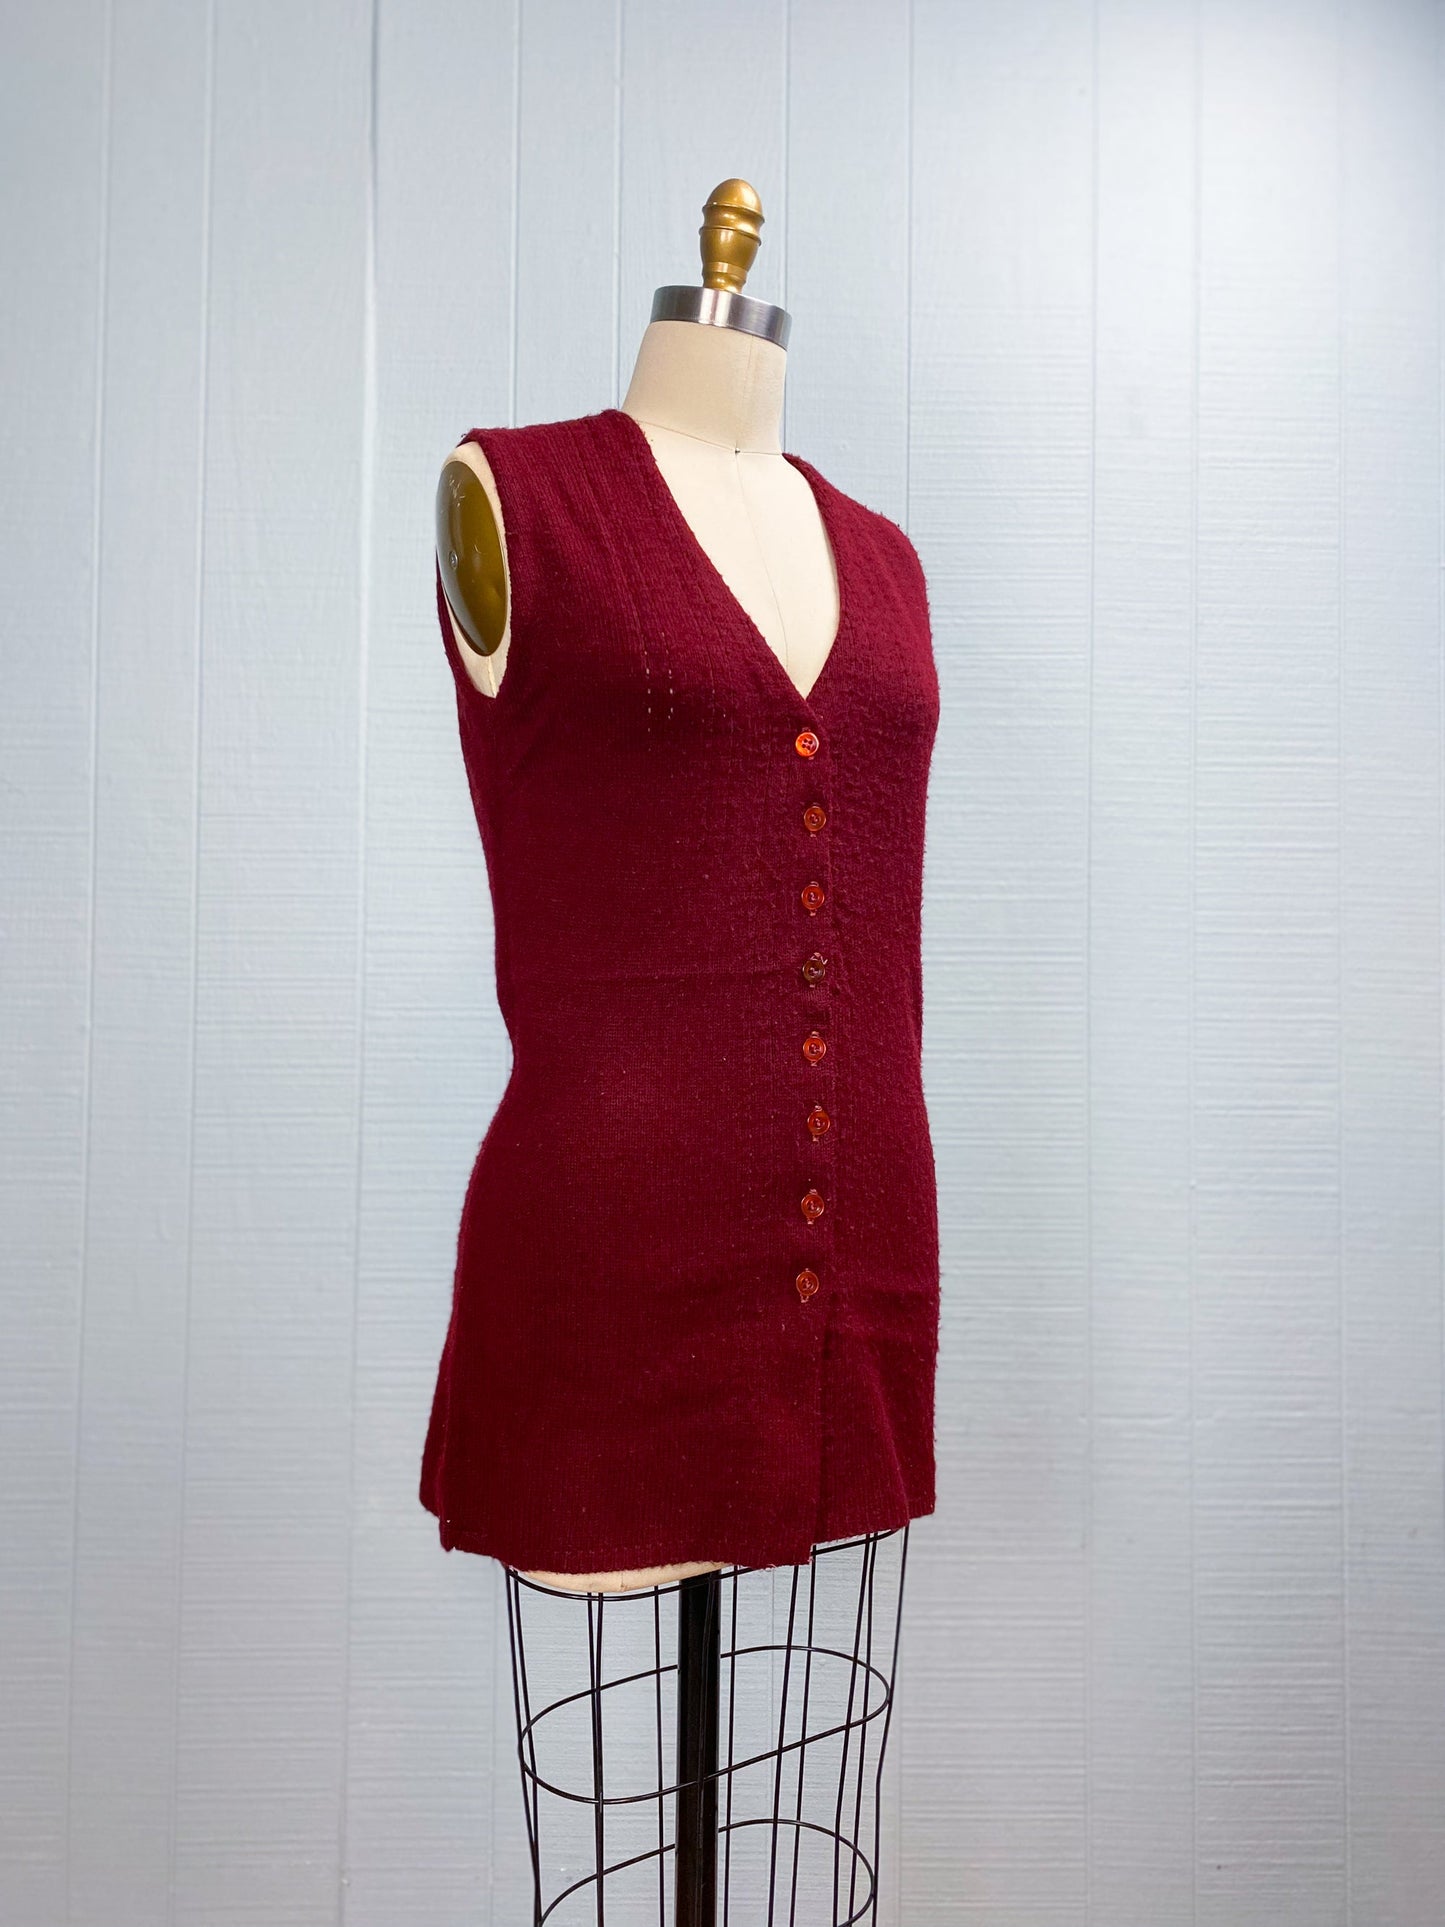 60's 70's Maroon Cable Knit Sweater Vest Bryant 9 by Carol Horn